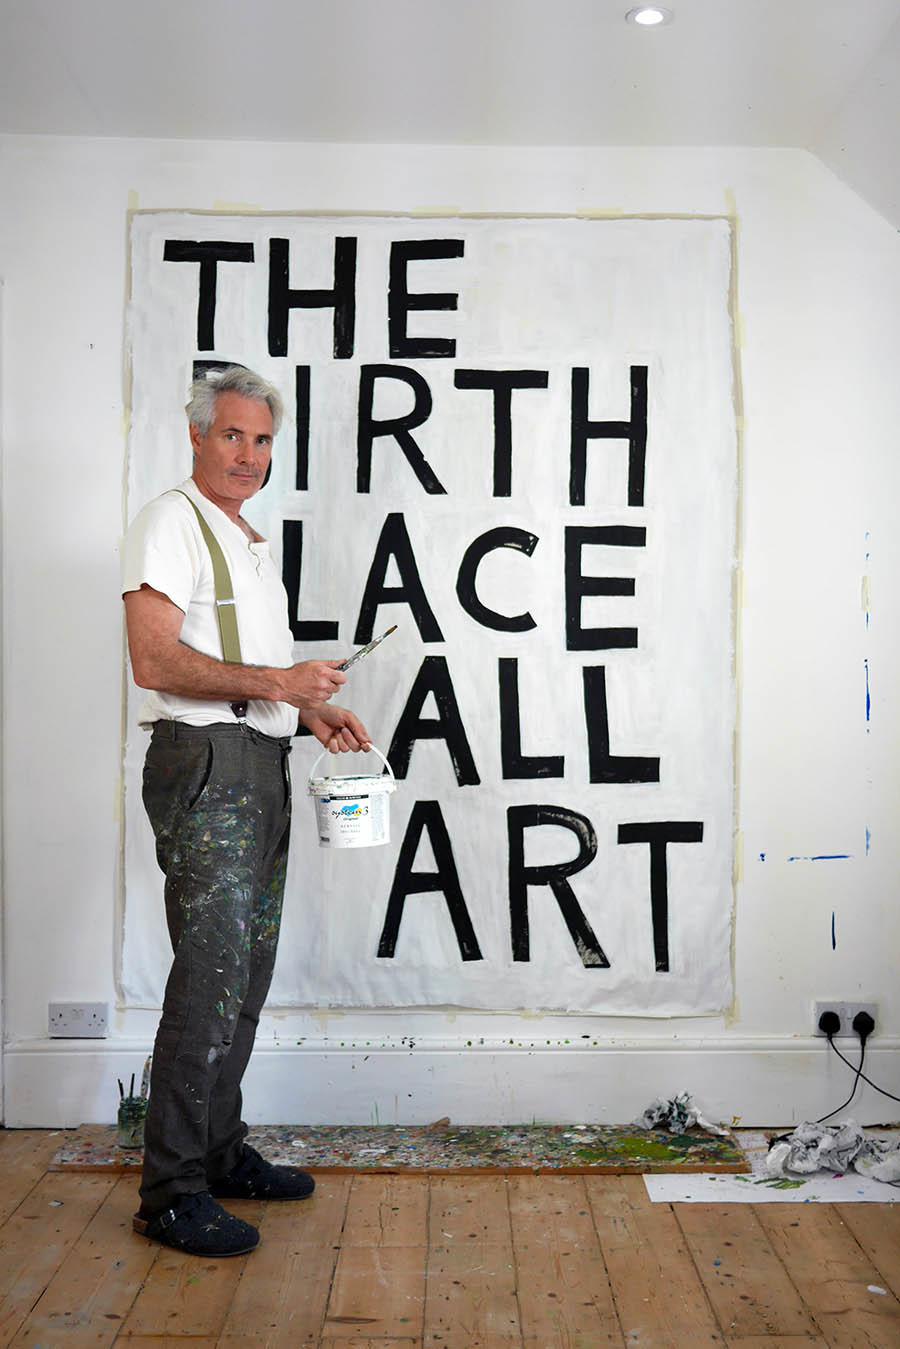 The Birthplace of all art by Jay Rechsteiner